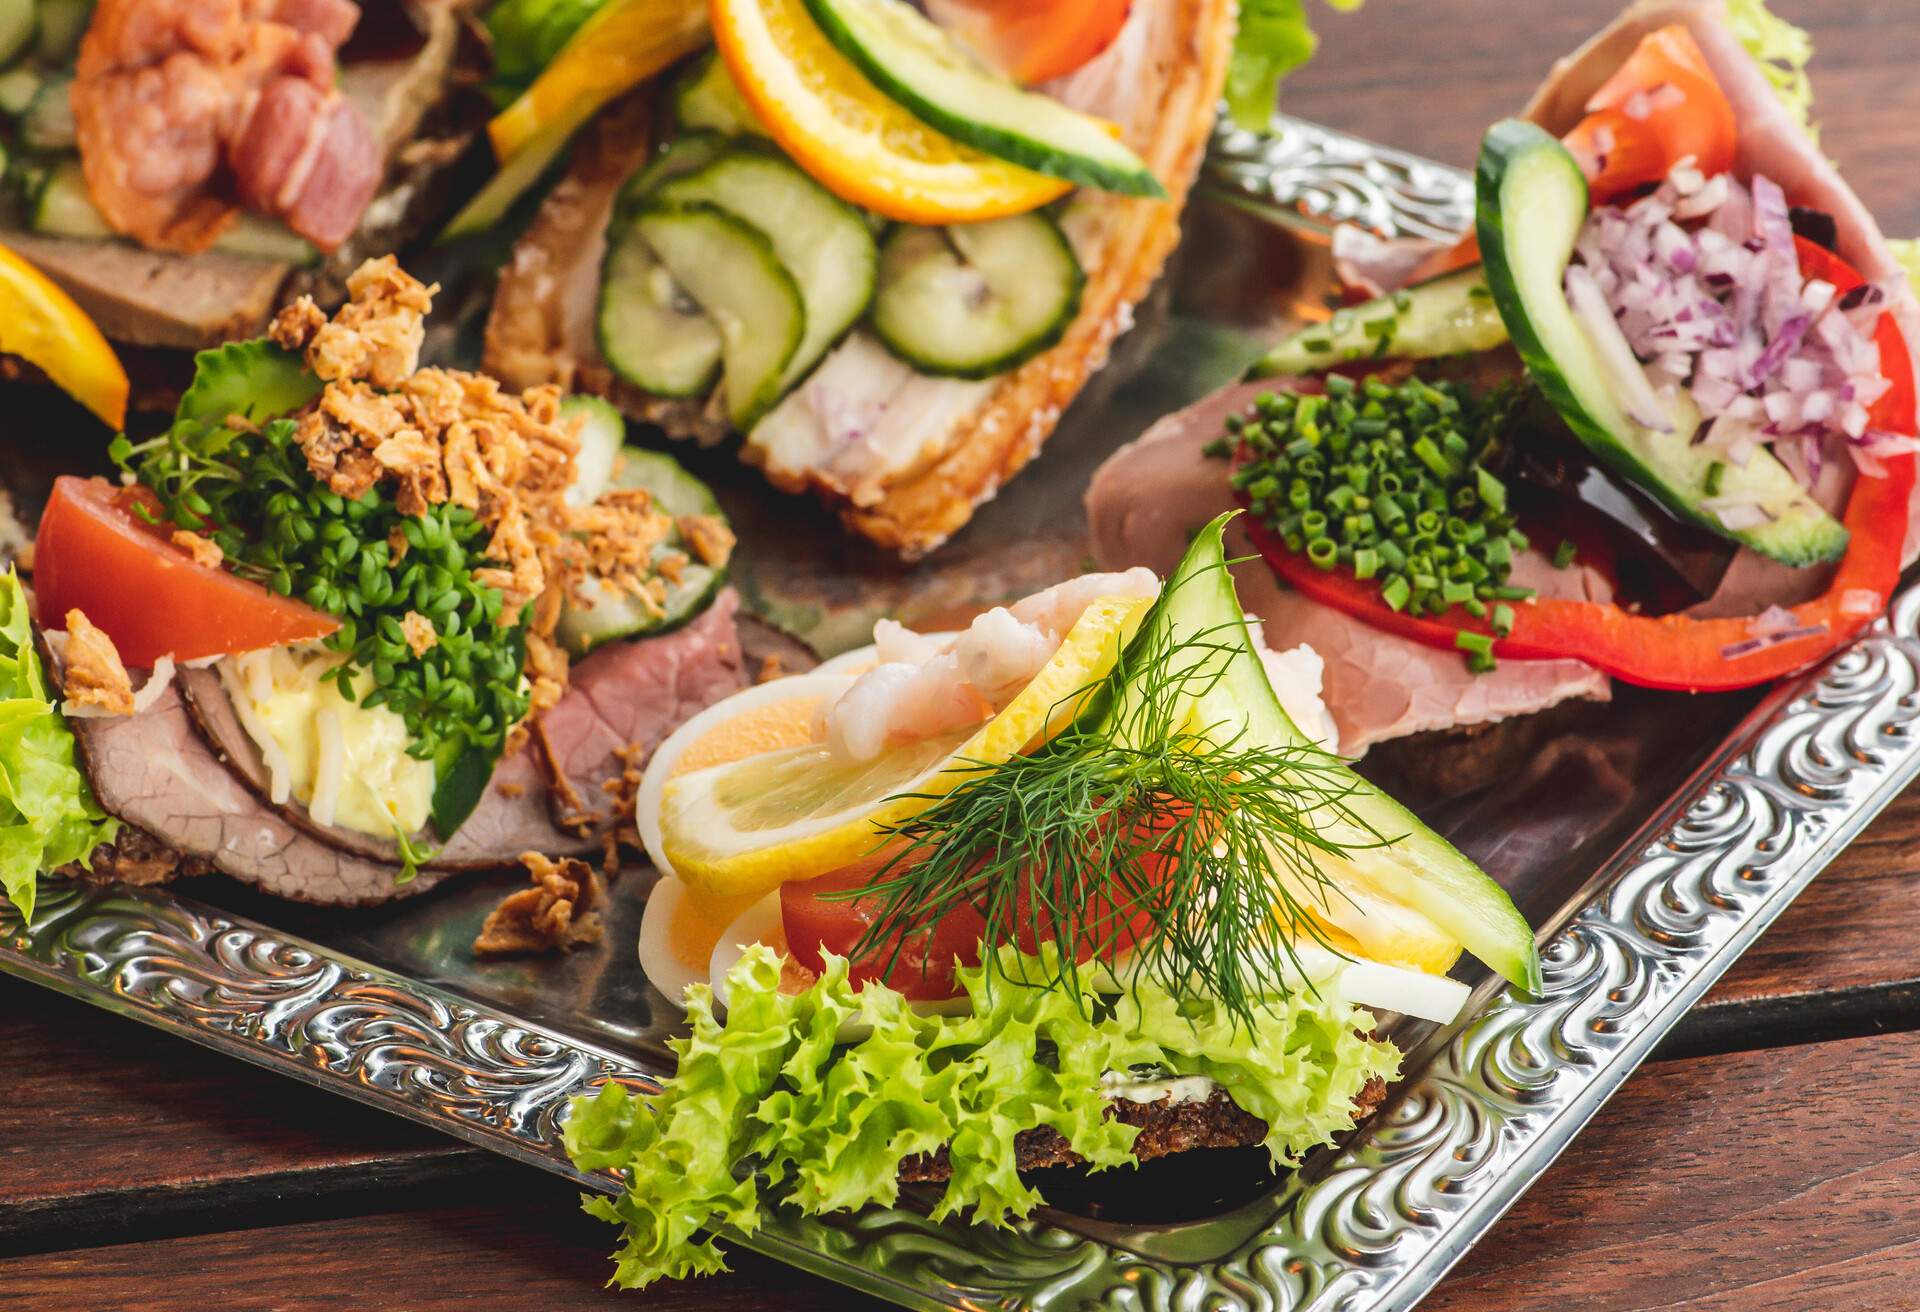 Danish traditional Smørrebrød or open sandwiches served in a plate, roast beef with remoulade, tomato and shredded horseradish on Danish rye bread, egg, prawns, lemon and mayonnaise